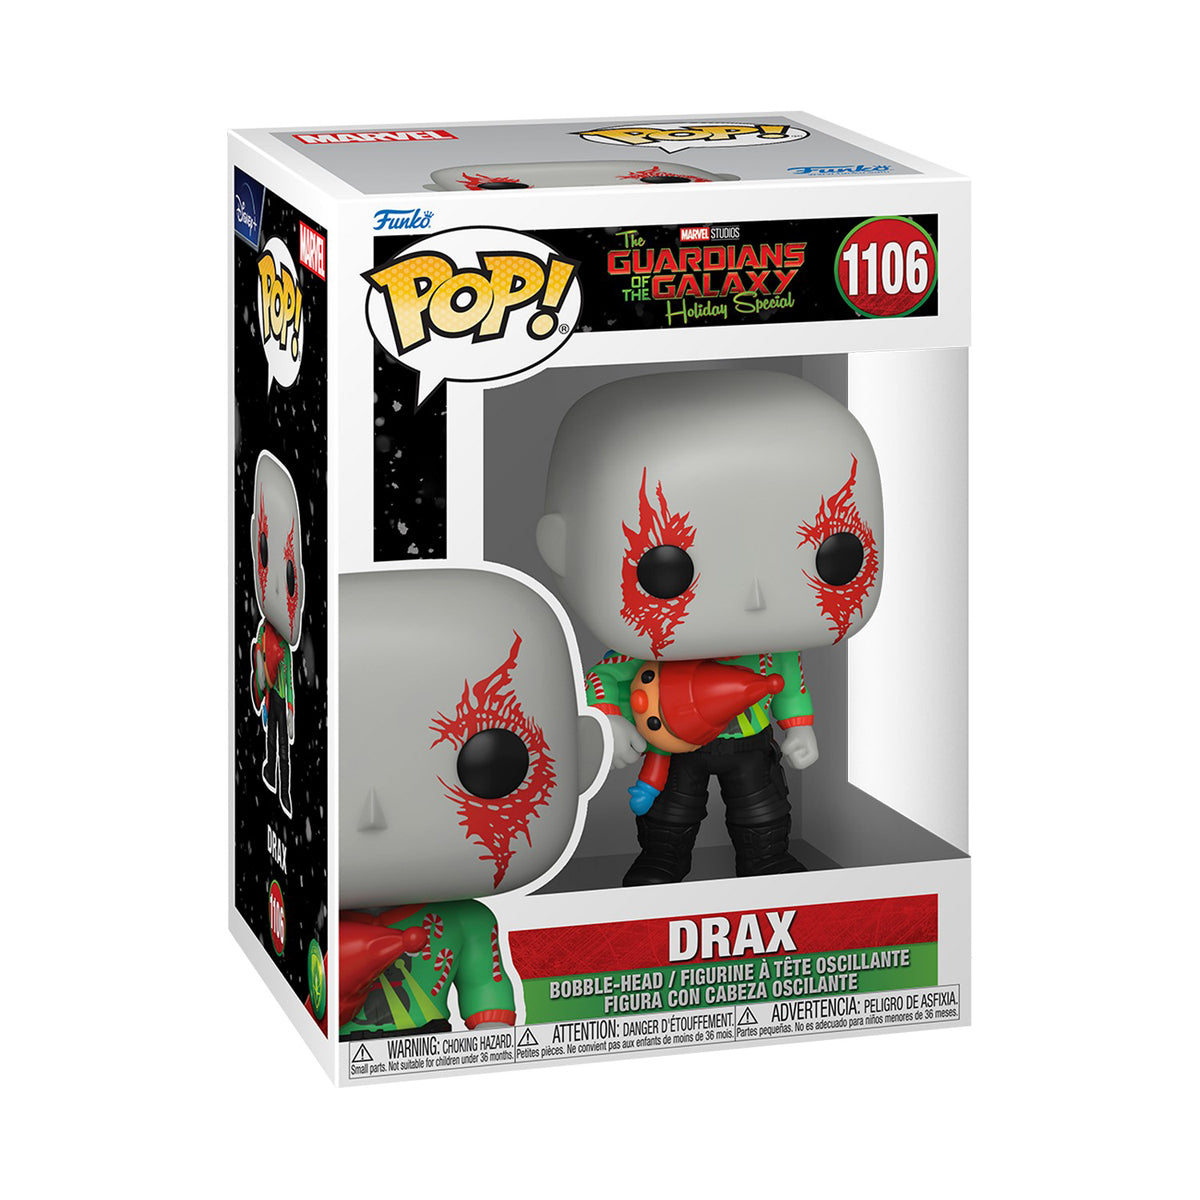 Funko Pop 1106 - Drax, Guardians of the Galaxy Holiday Special